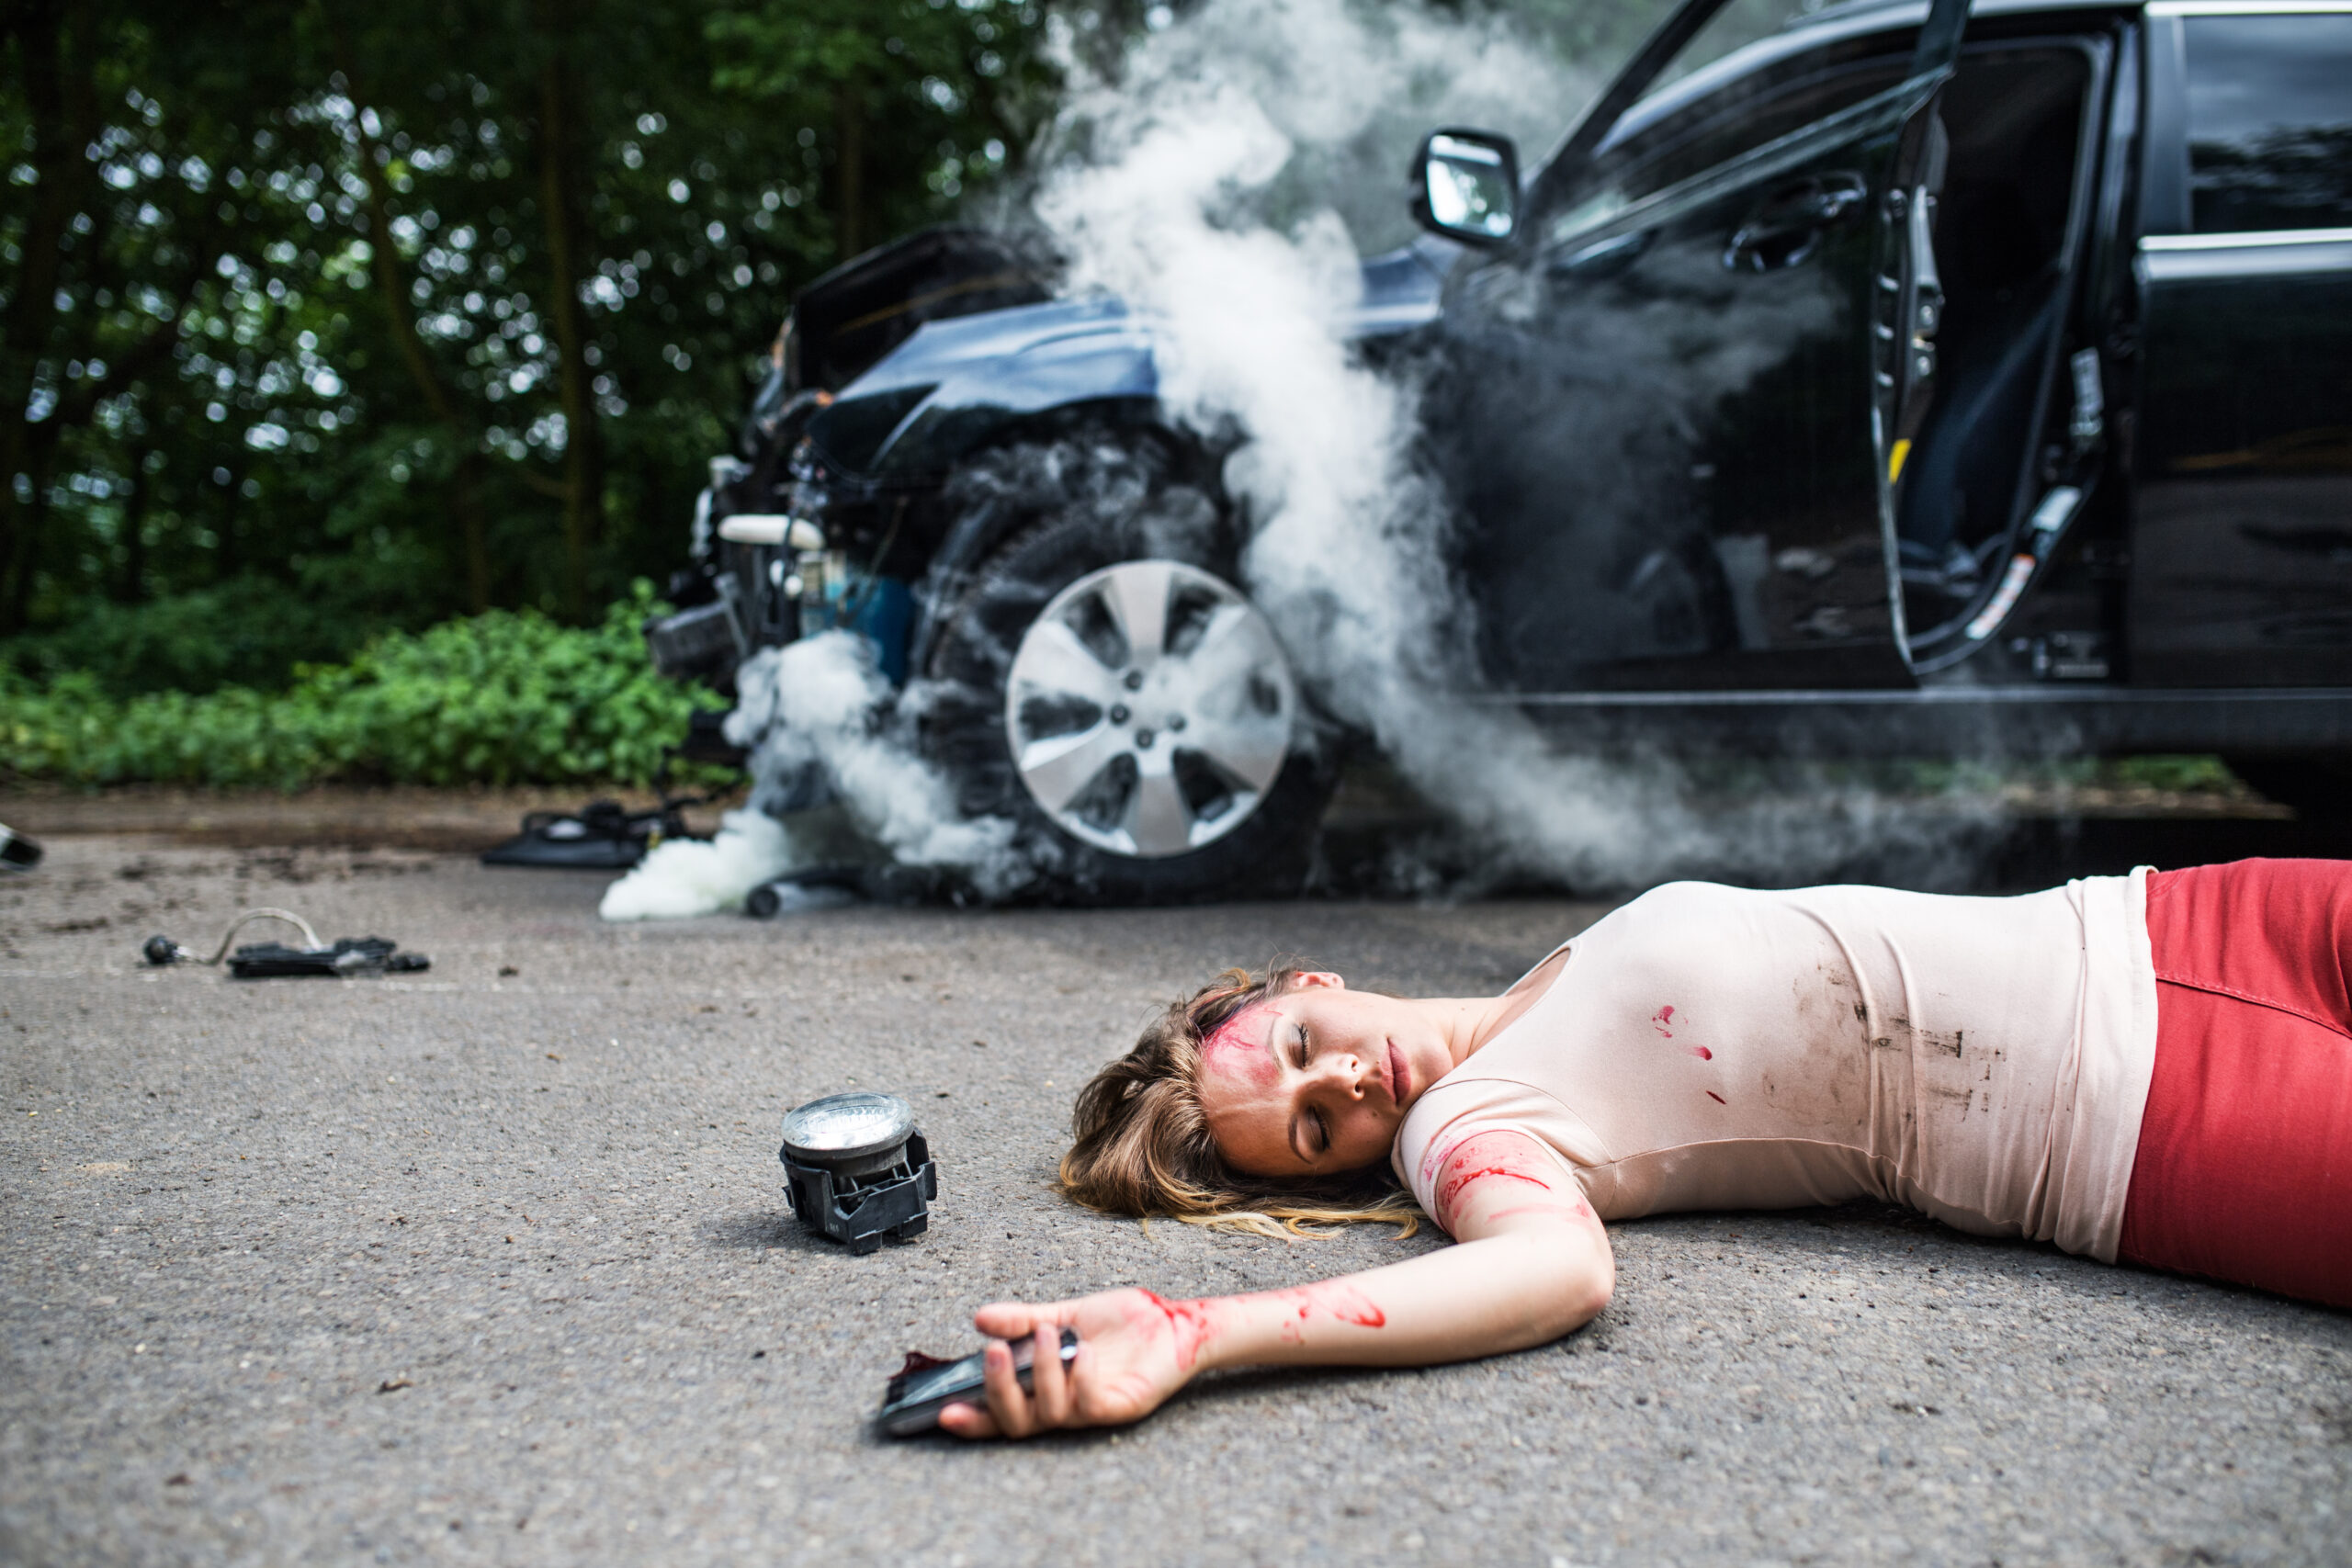 Young injured woman lying on the road after a car accident, unconscious.